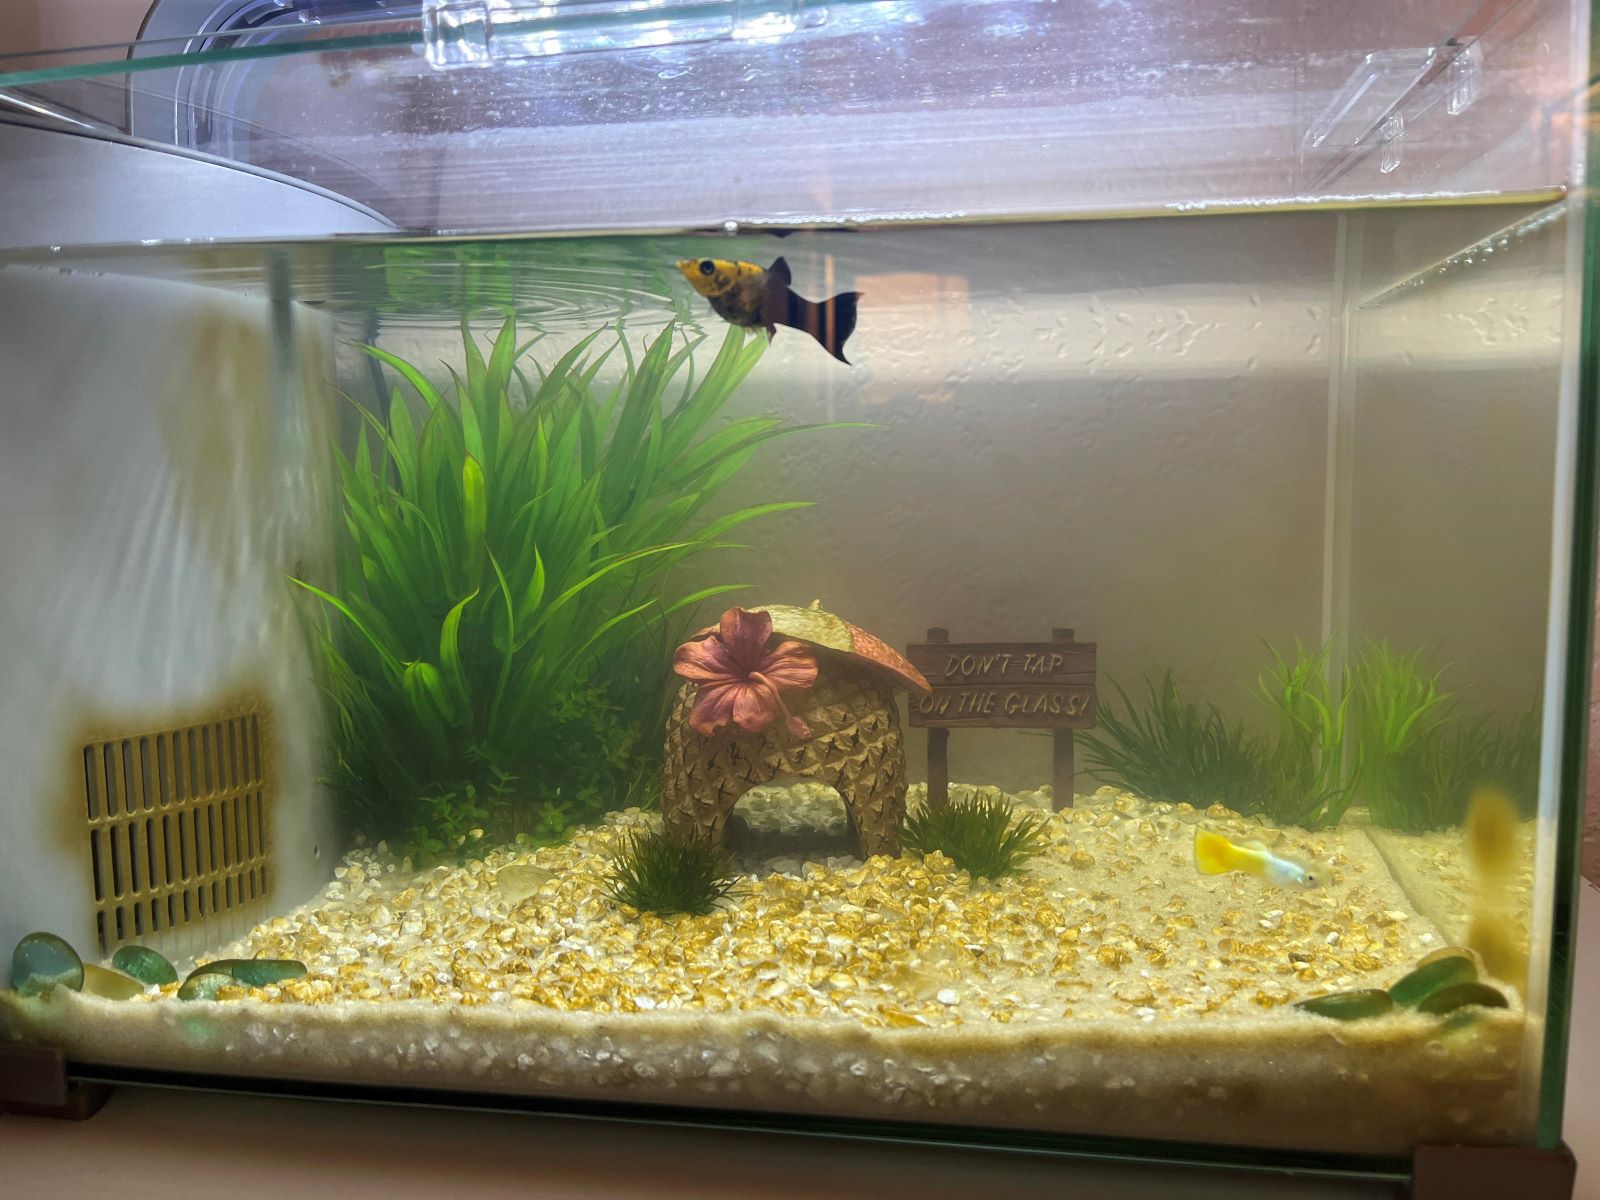 Unbelievable! You Won't Believe What This Person Has In Their Home Aquarium!